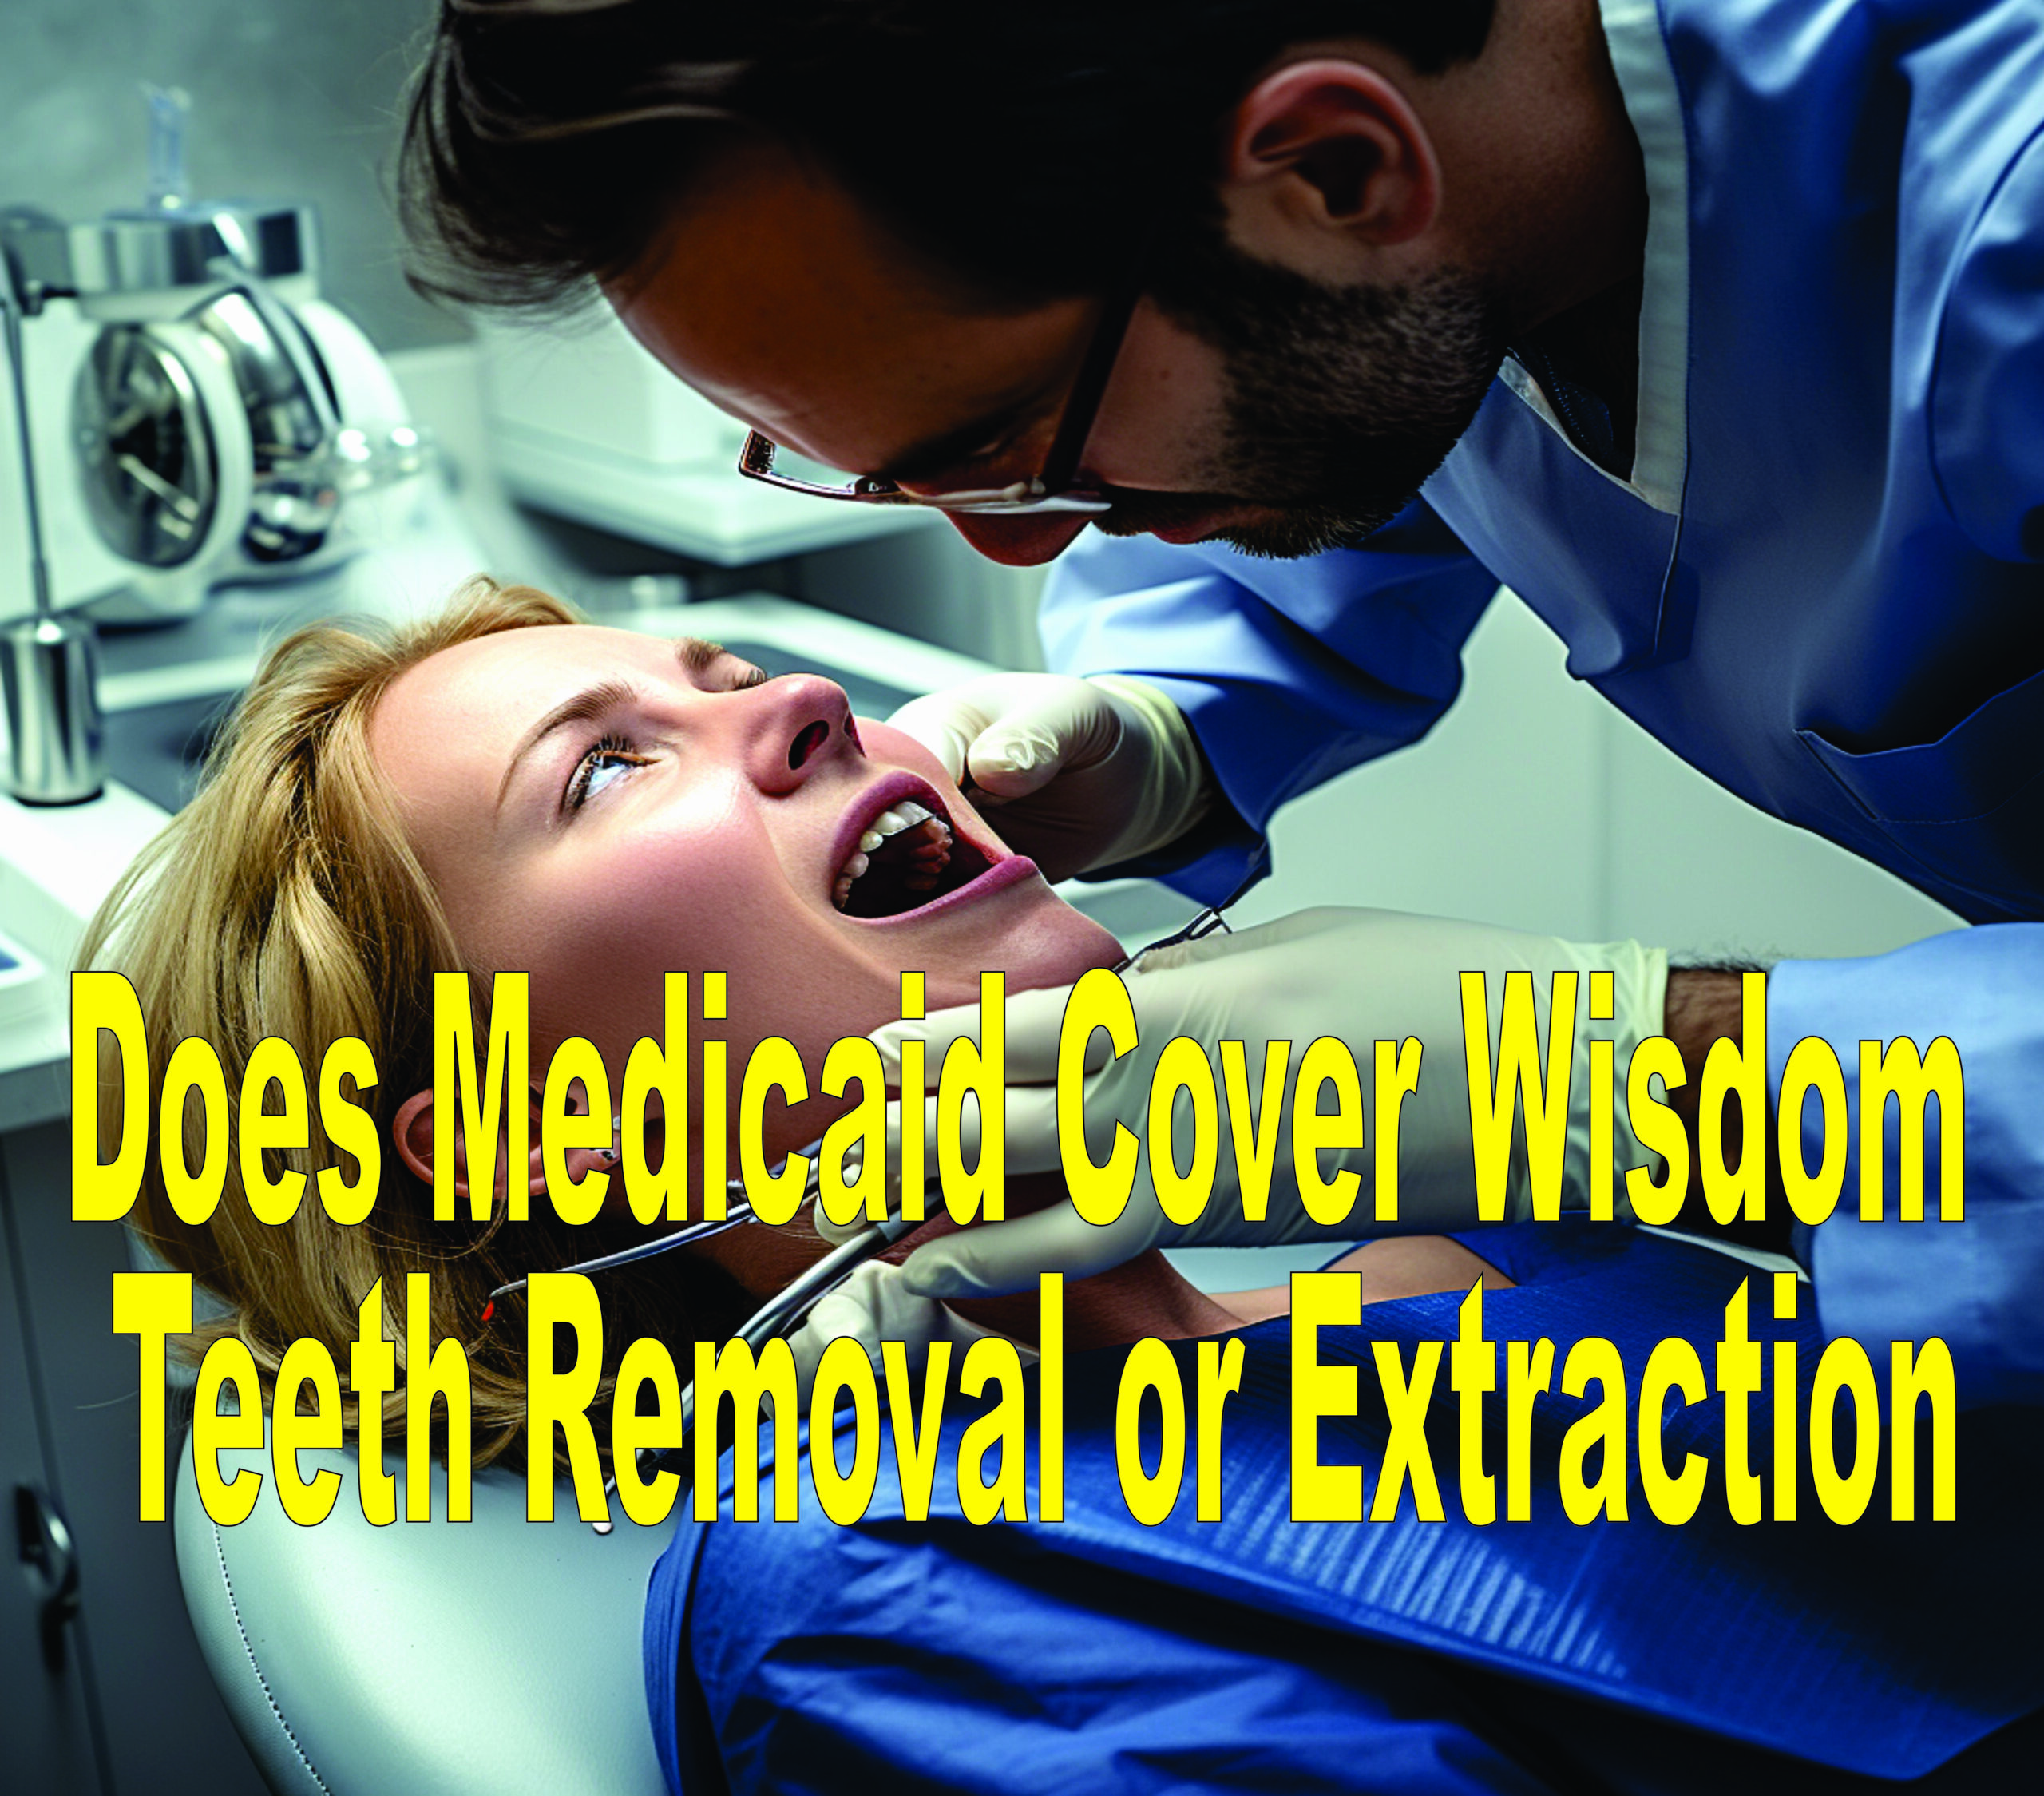 Does Medicaid Cover Wisdom Teeth Removal Or Extraction